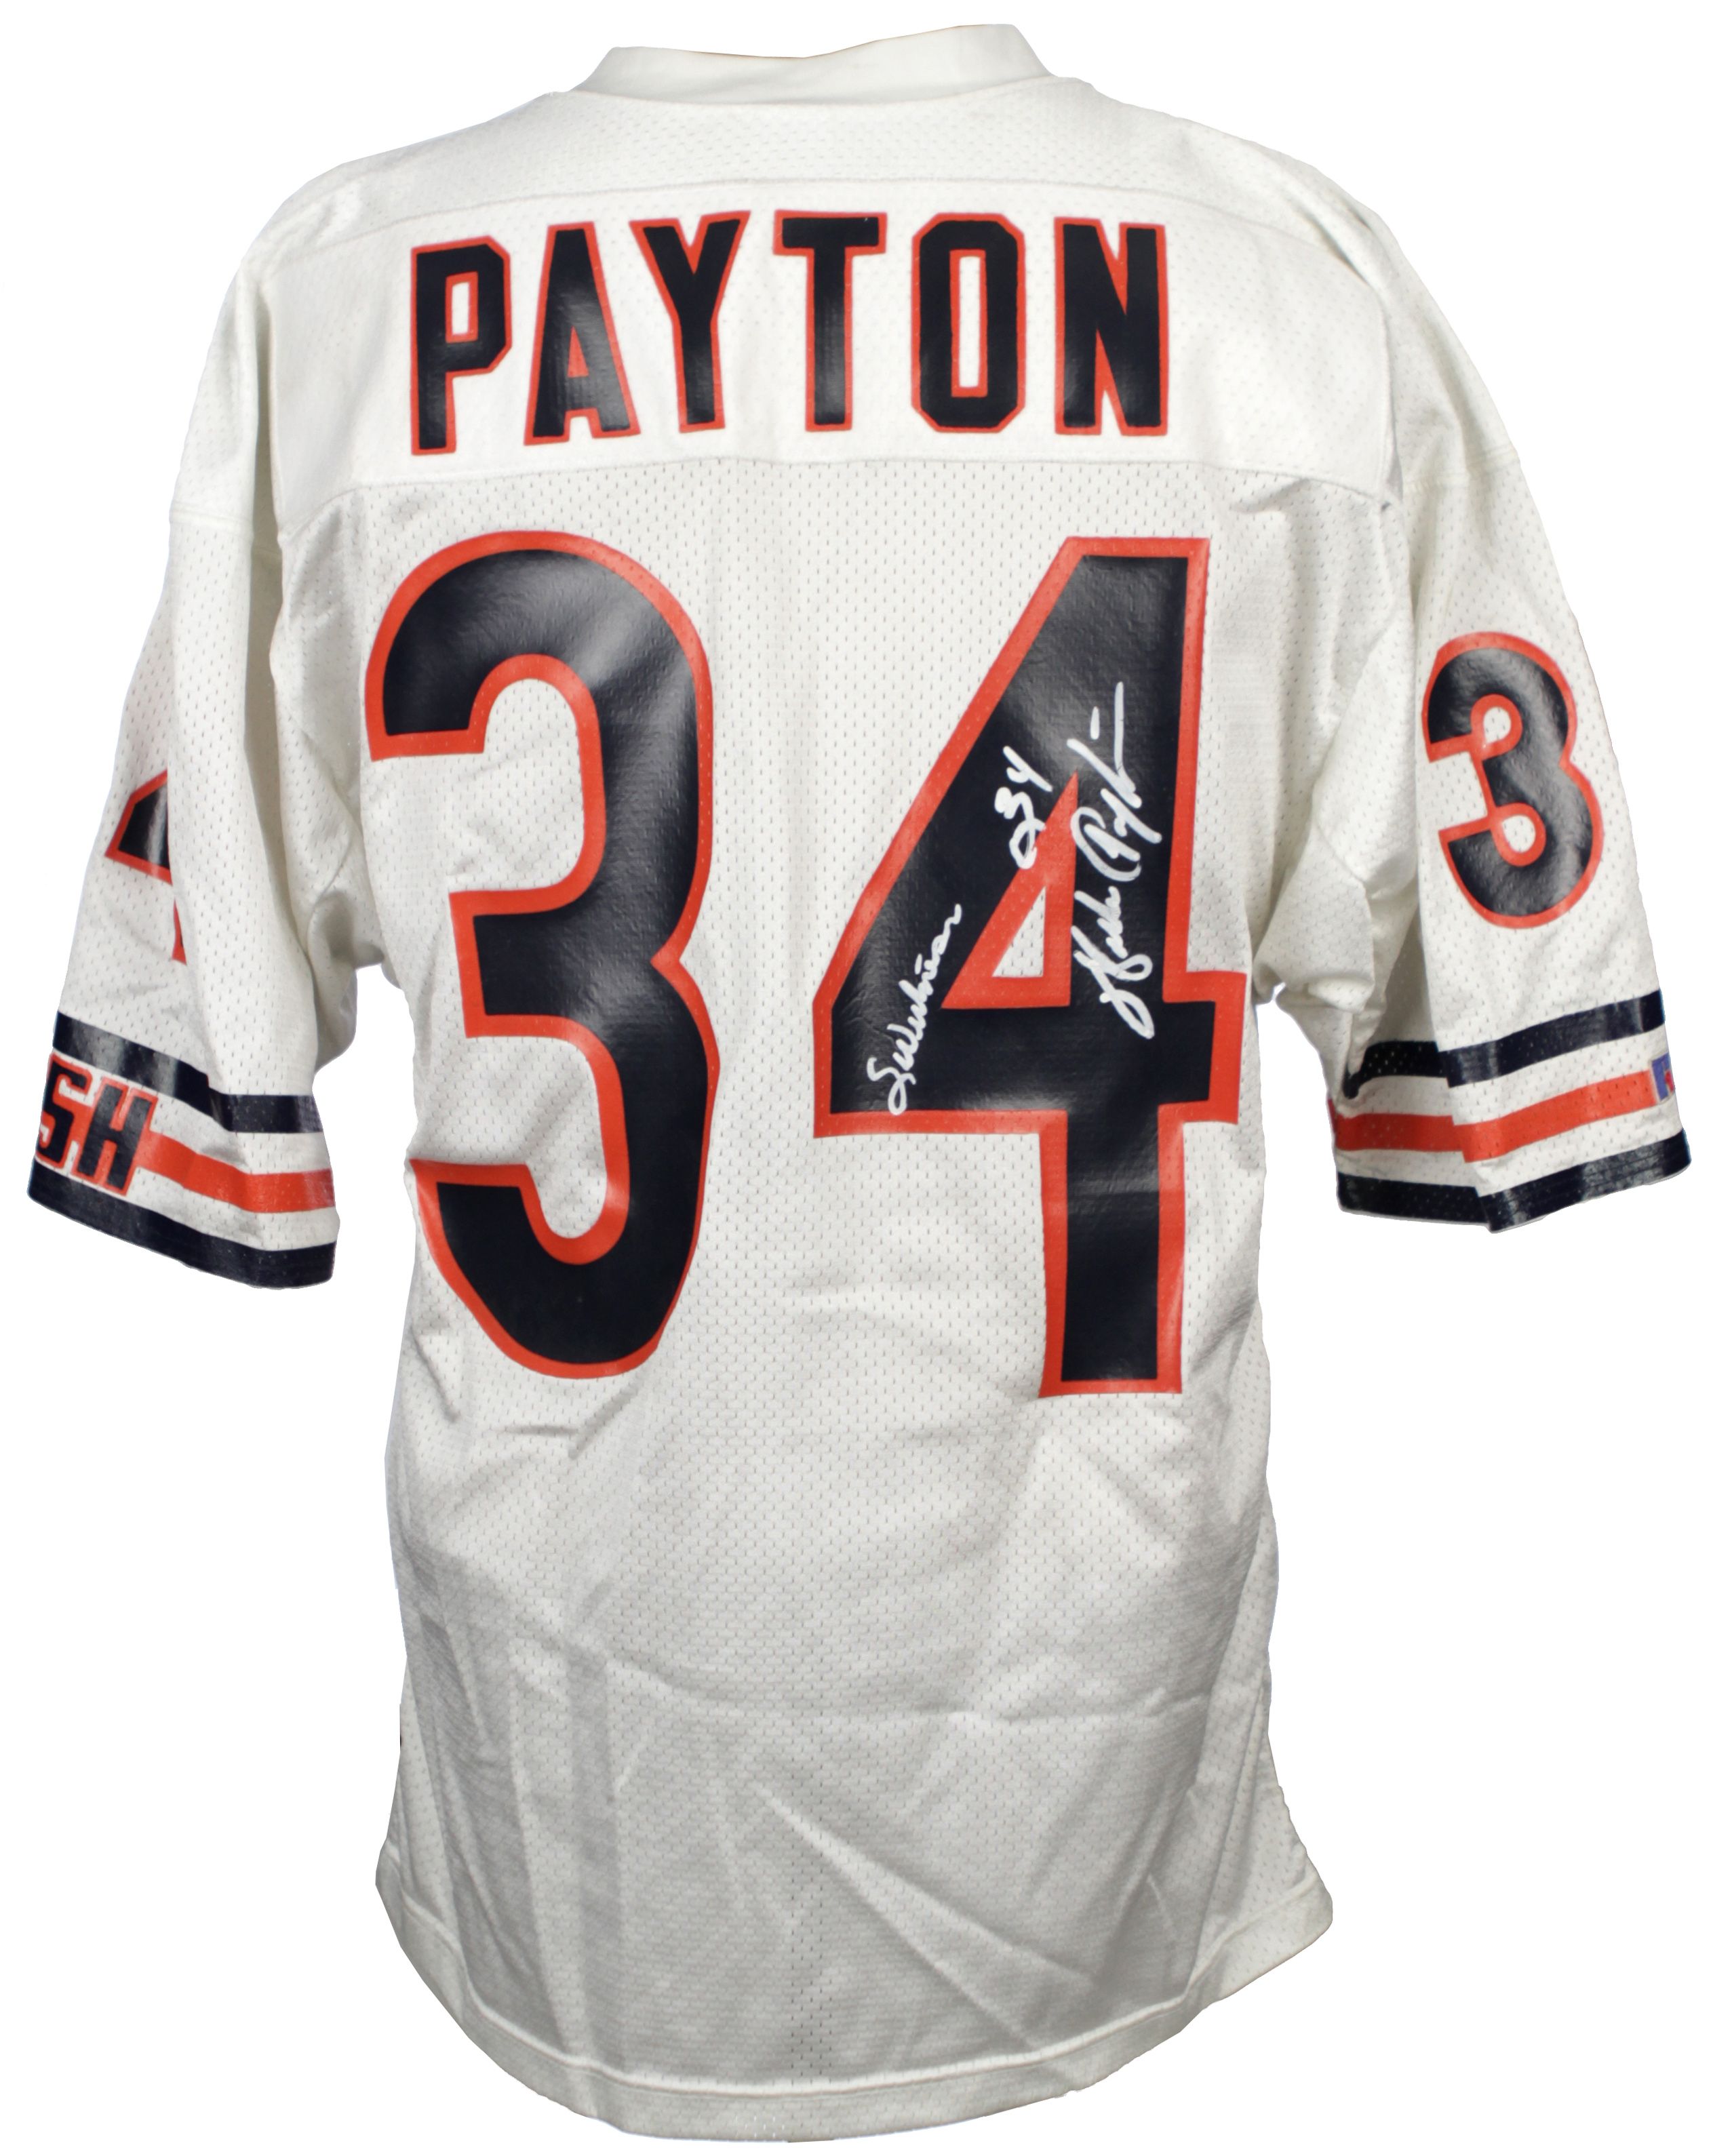 walter payton jersey authentic